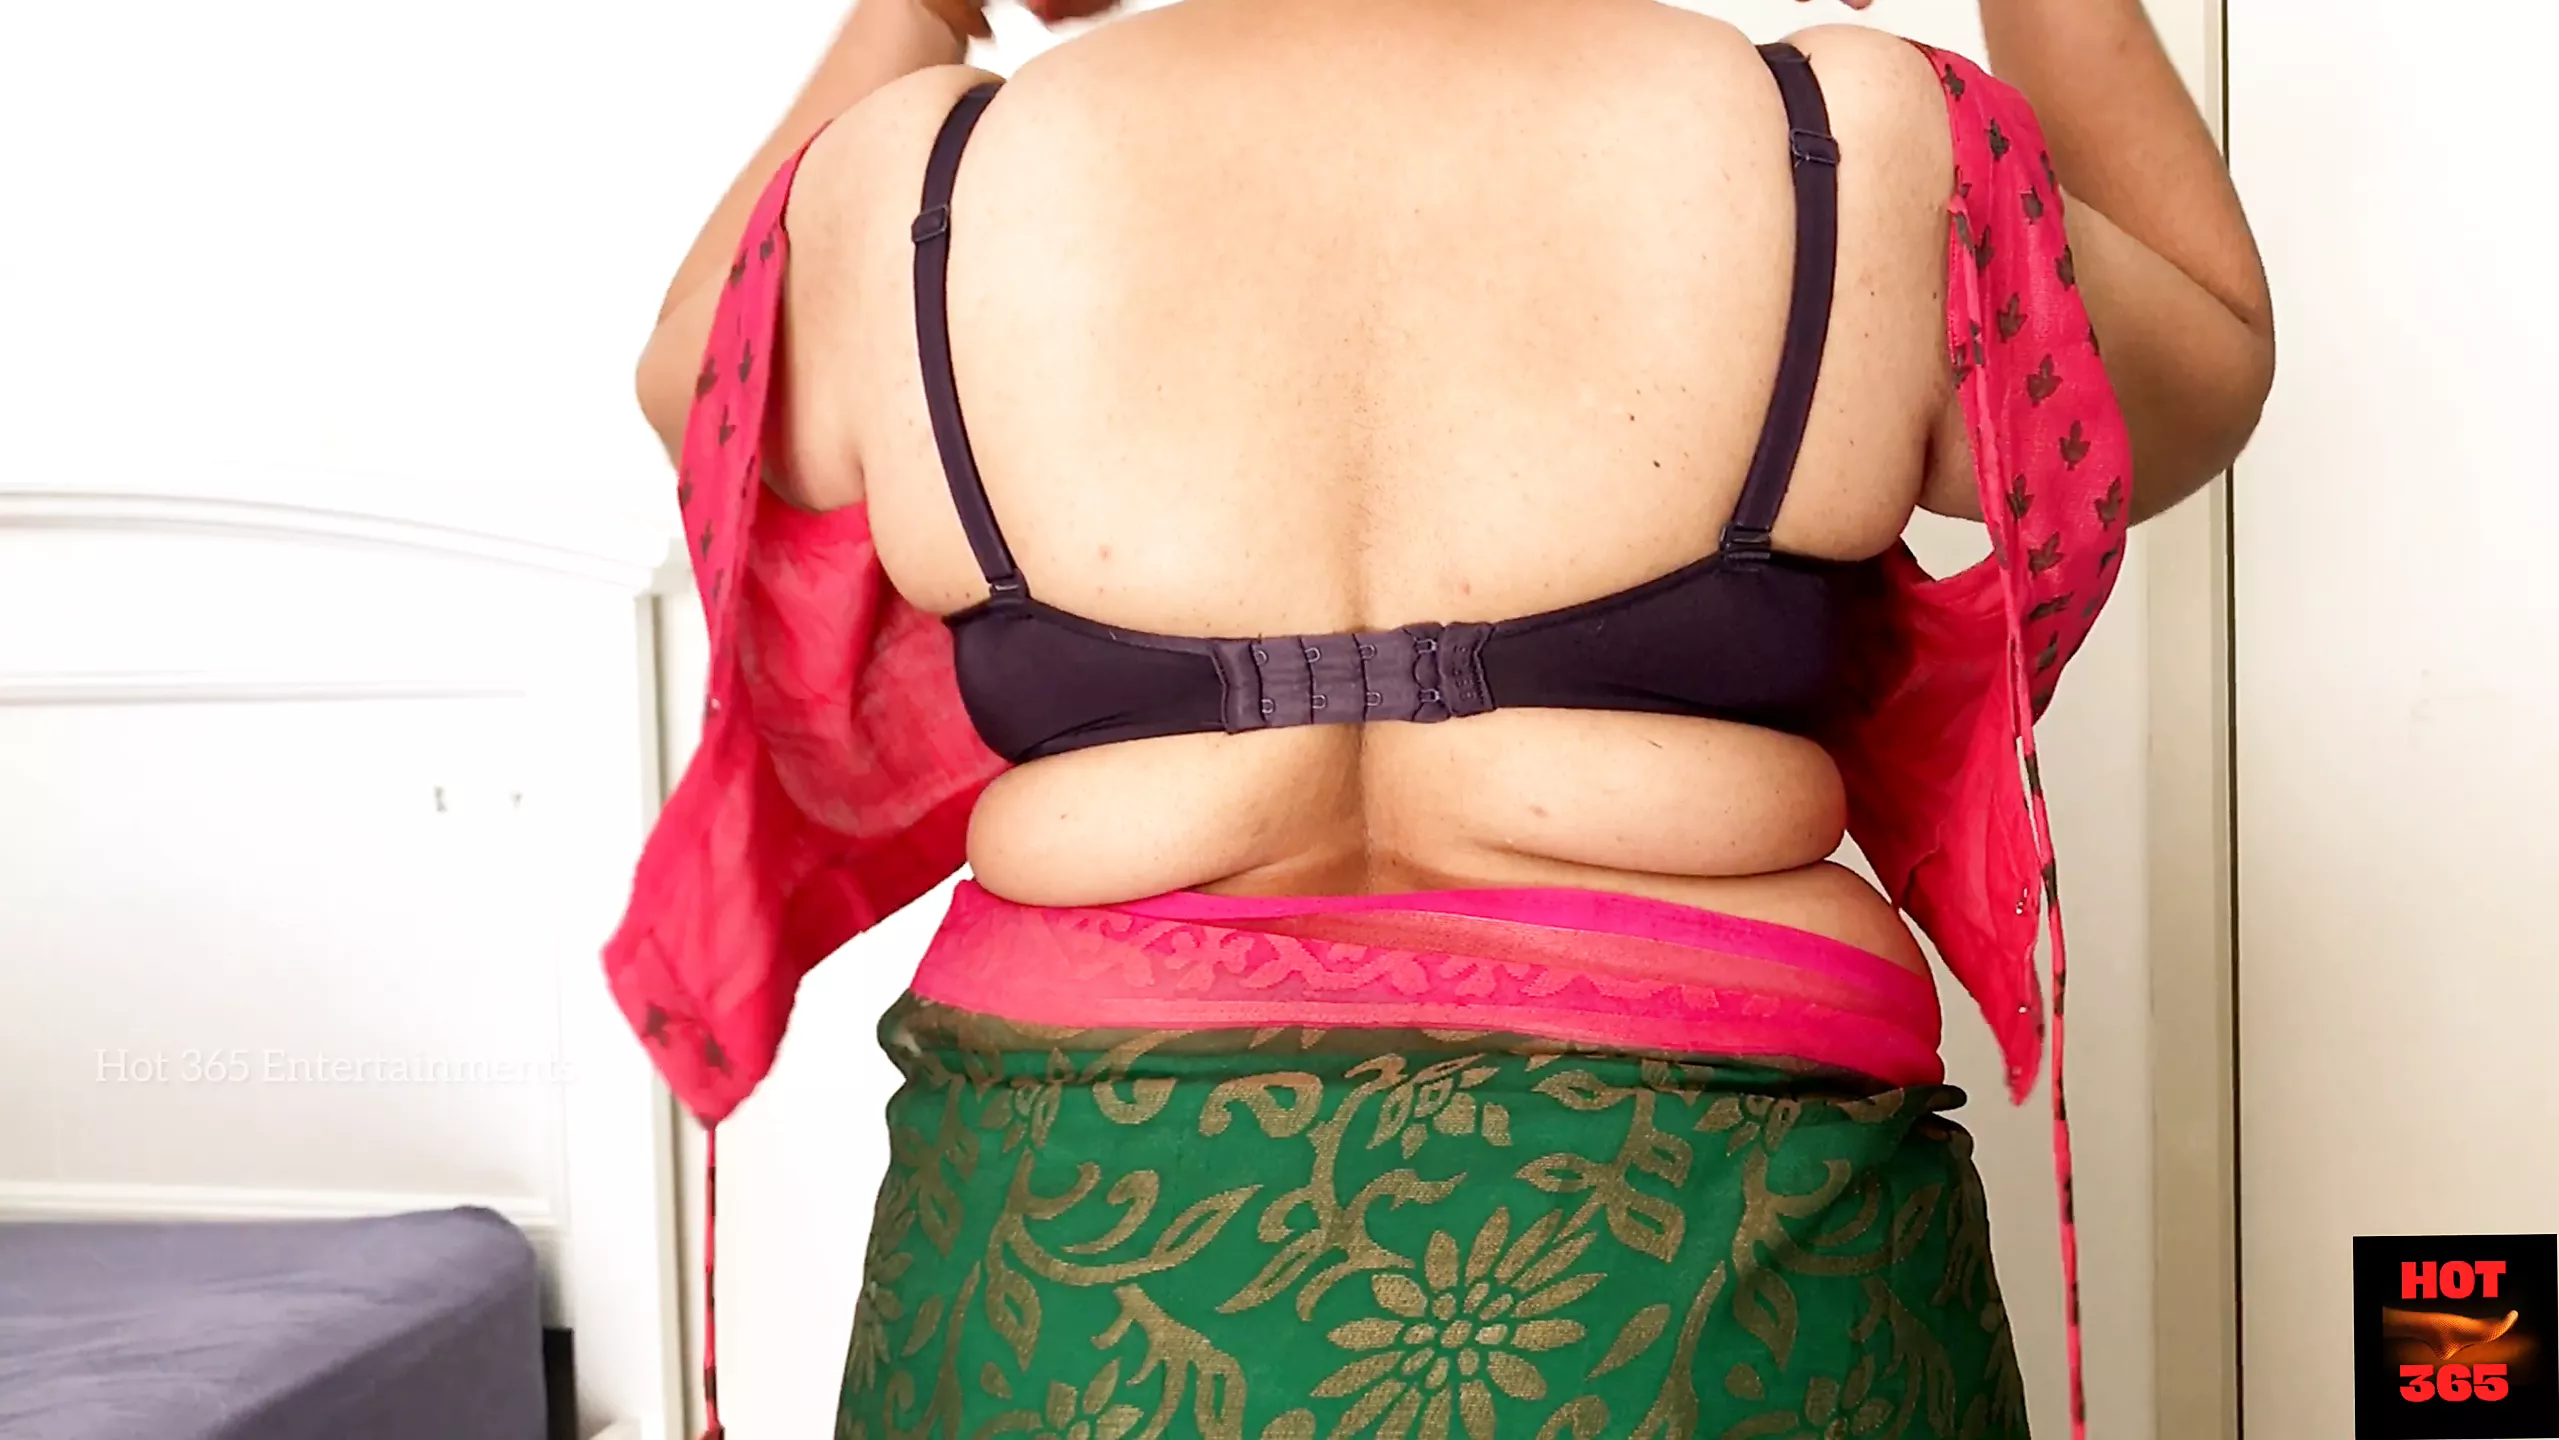 Sexiest Saree Draping in an Erotic Pose - No image